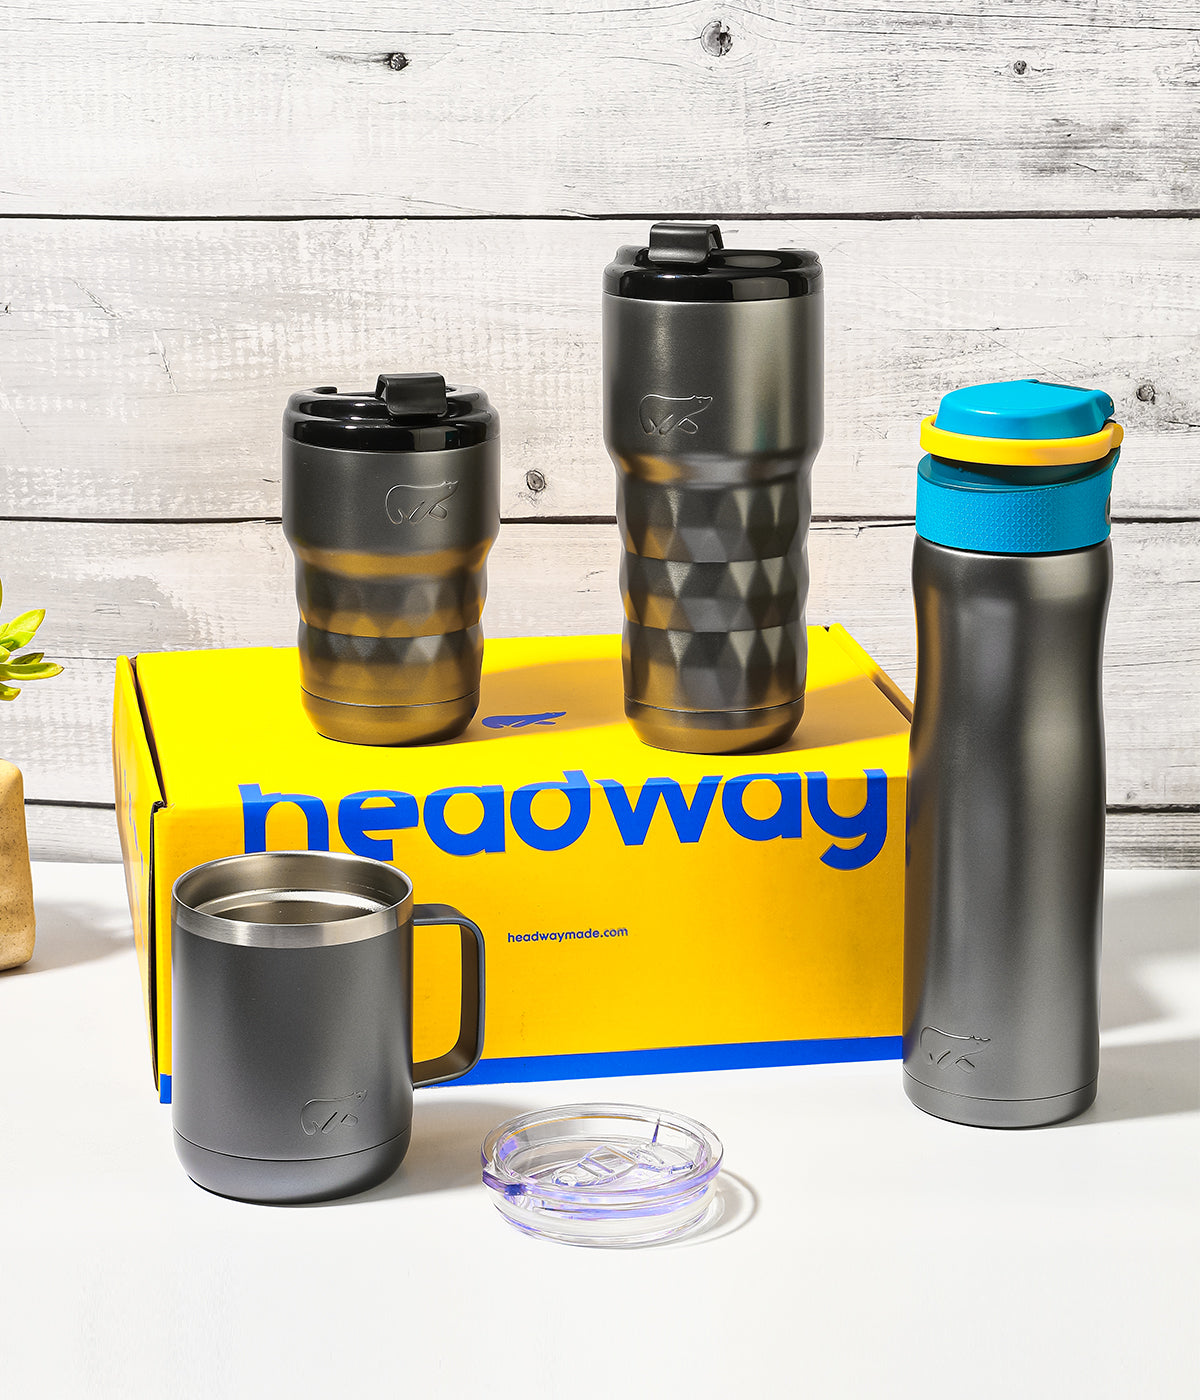 Headway corporate gifts